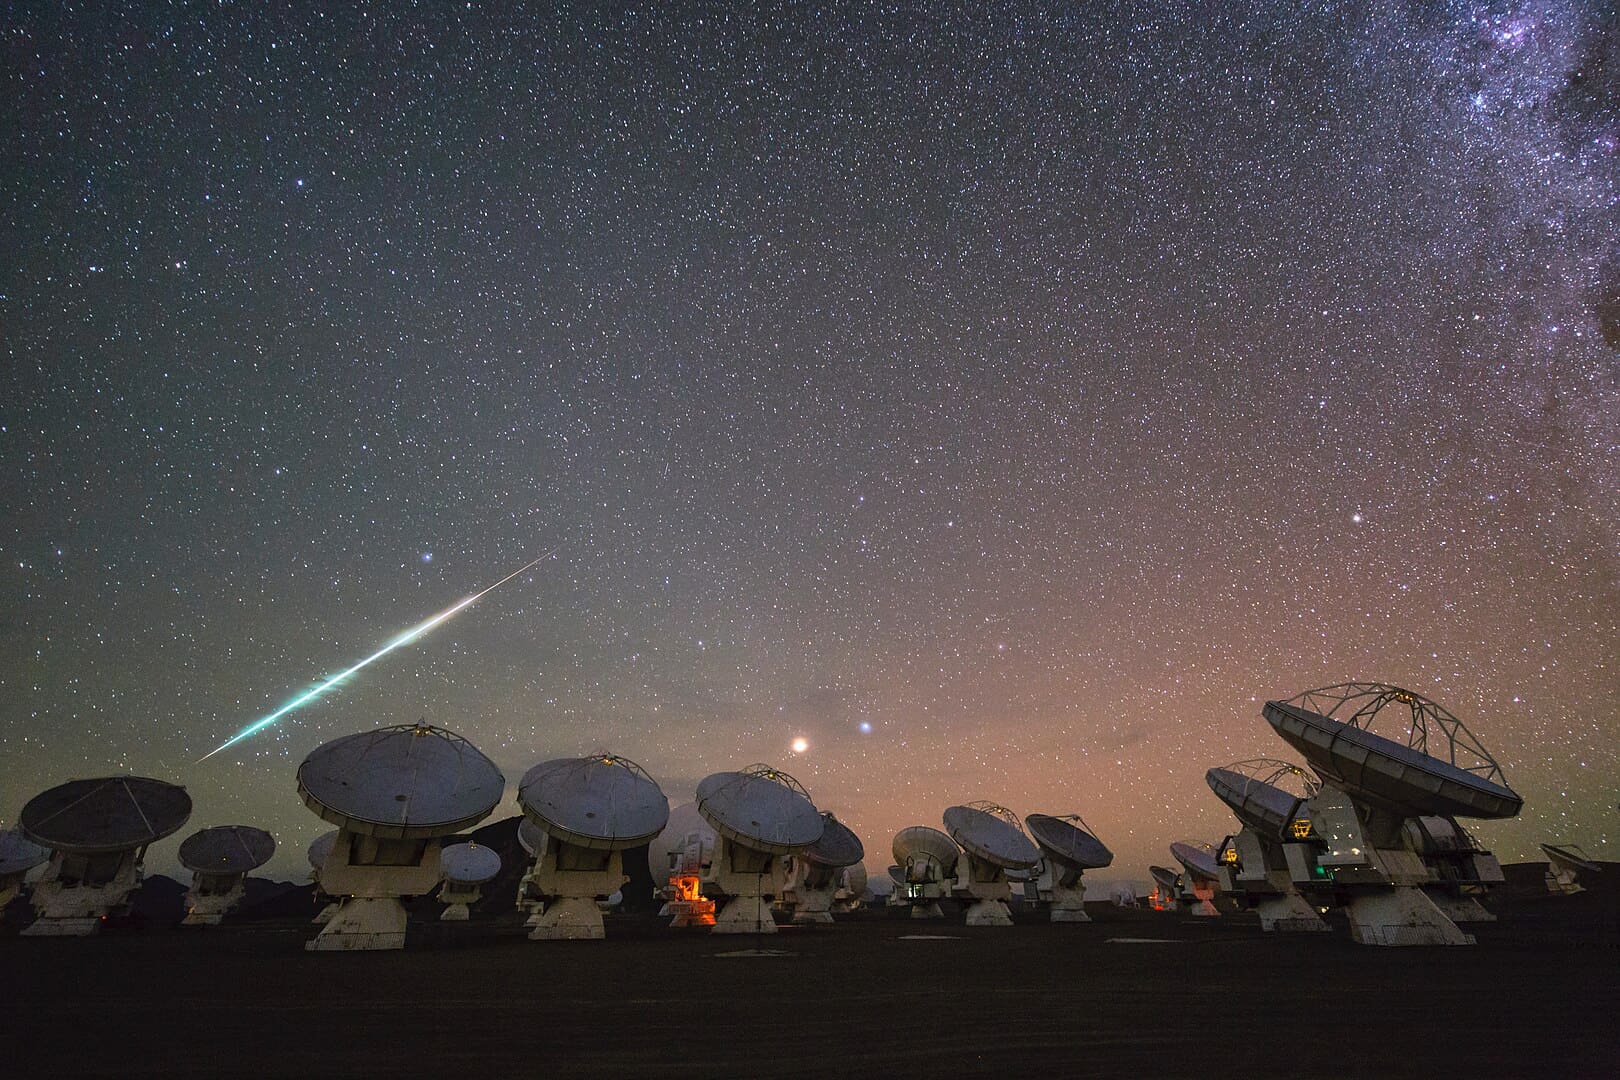 Meteor seen from the site of the Atacama Large Millimeter Array (ALMA)